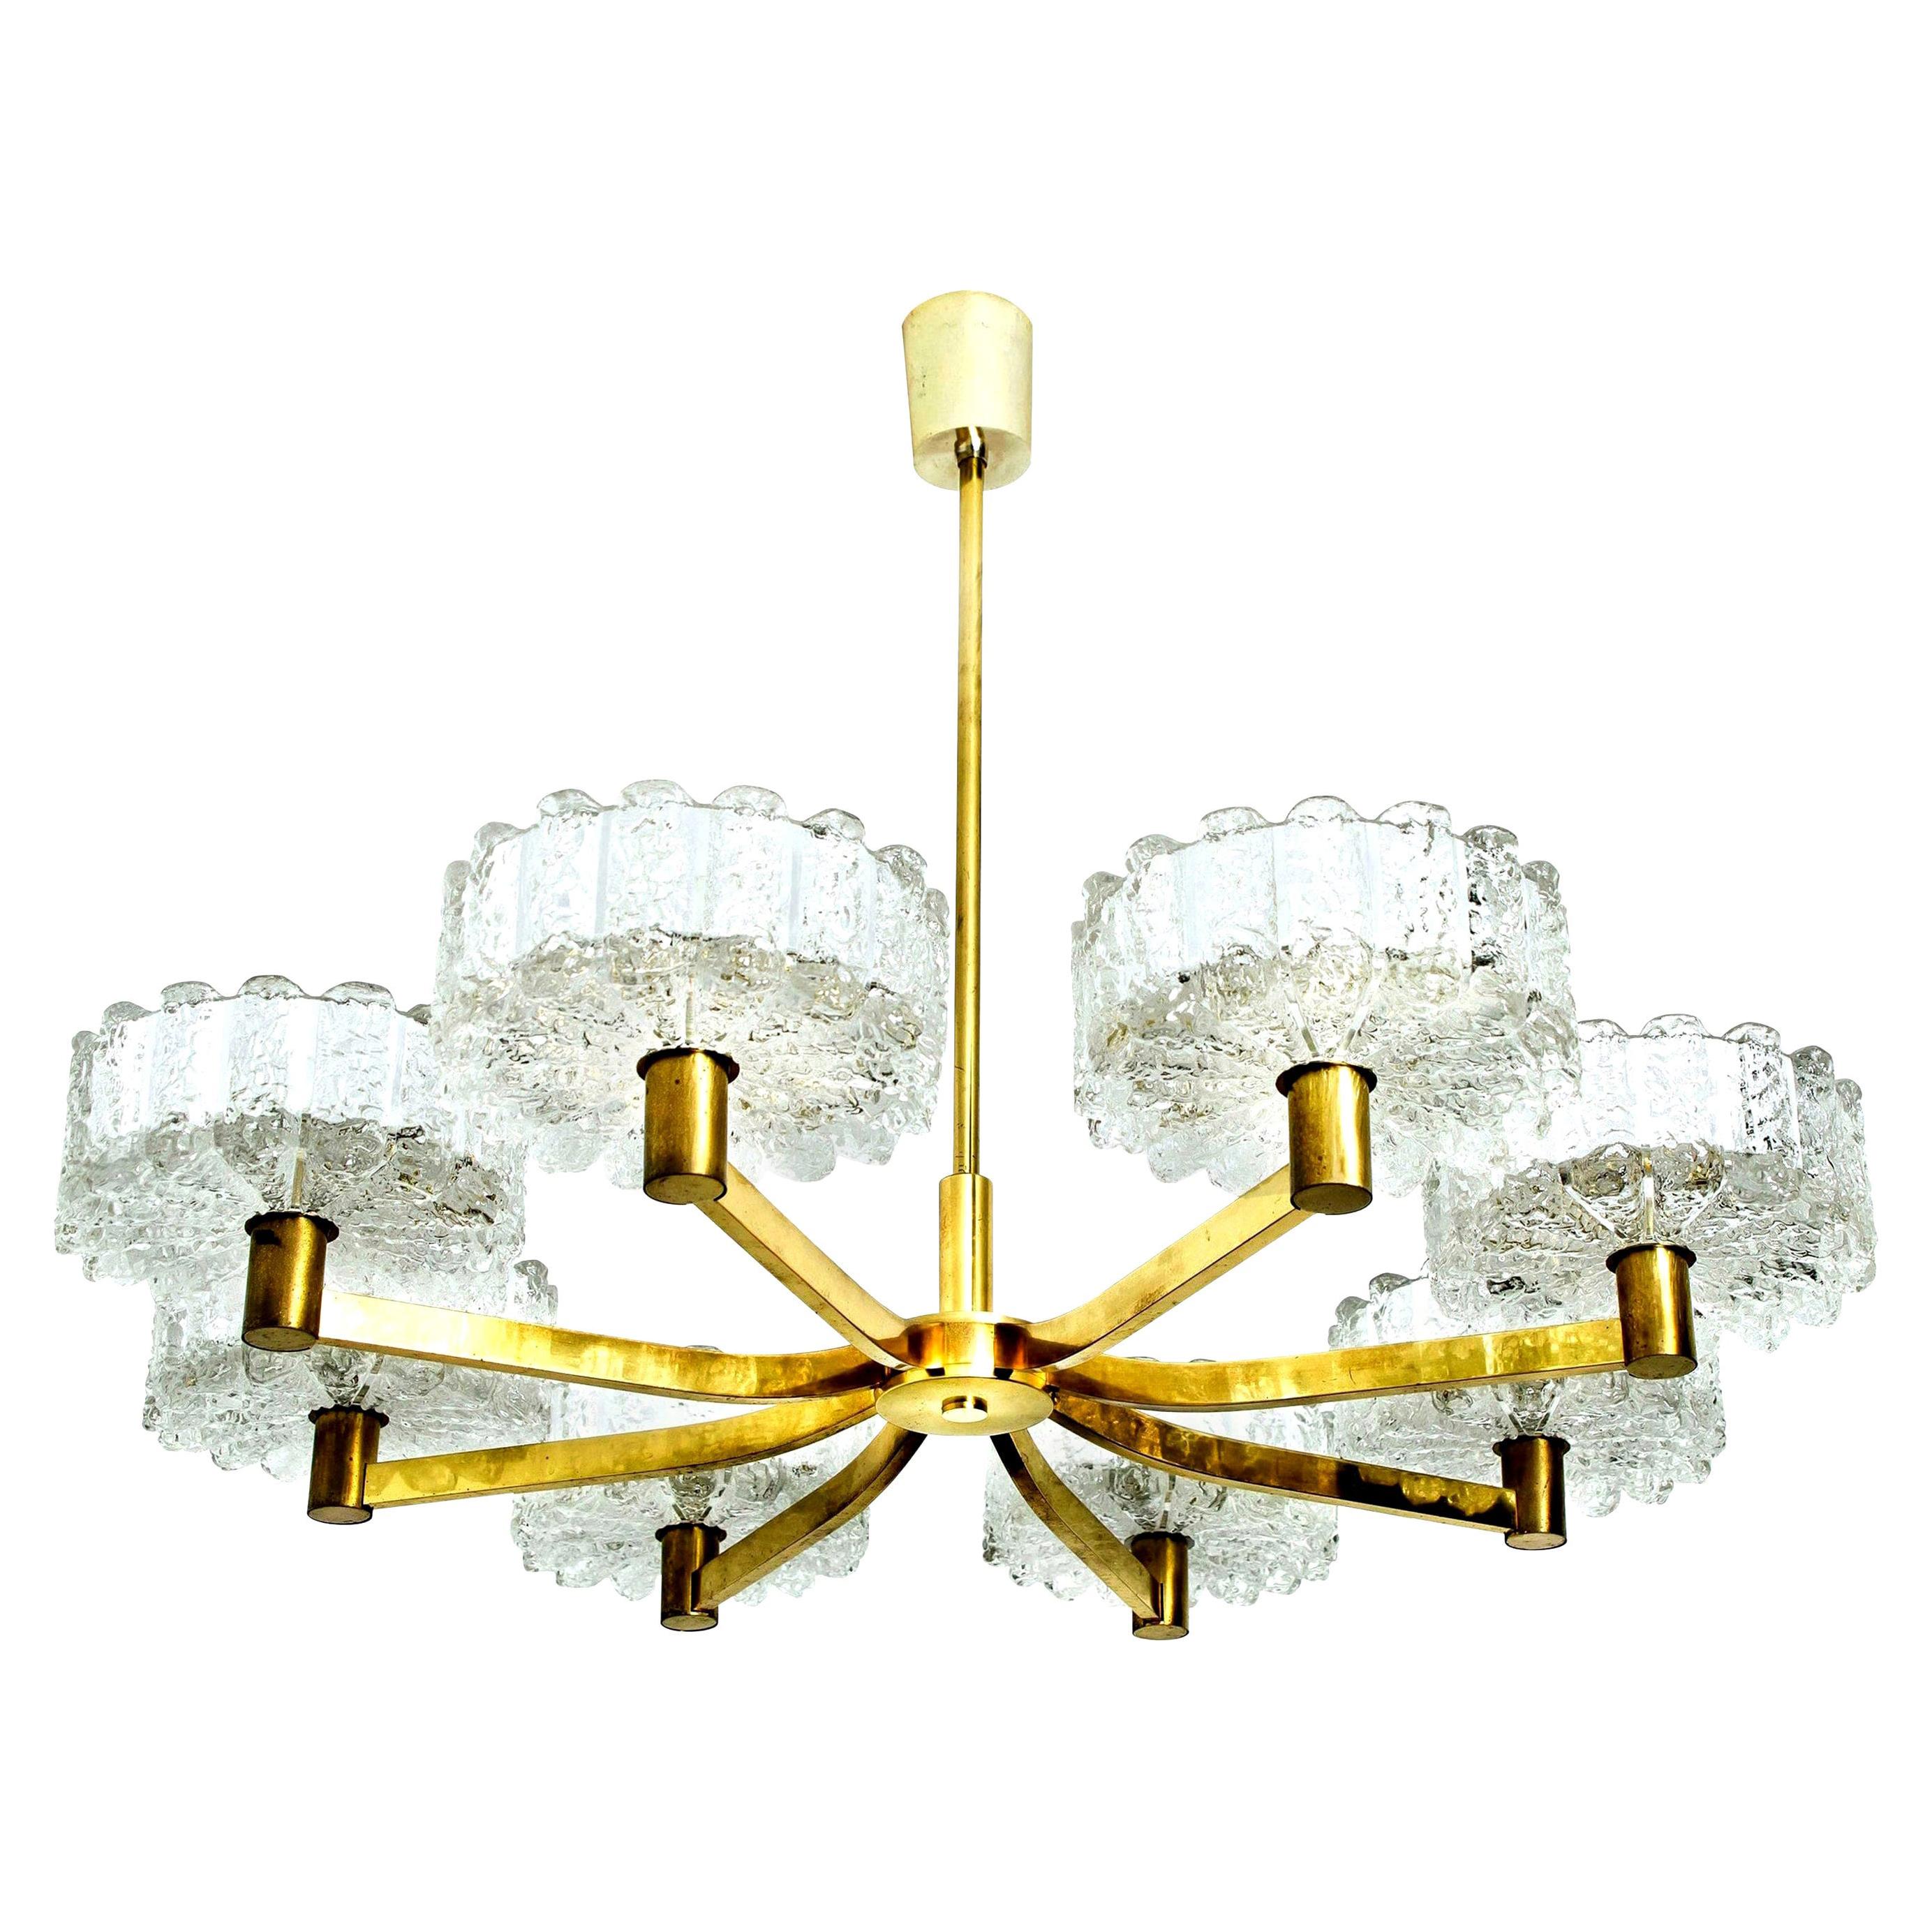 Modernist example of German Brutalist design and traditional elegance. Quality brass frame in an elegant warm gold color, consisting of eight arms gathering in the middle of the fixture forming a sun pattern. Measures: Diameter 31.5 inch (80 cm)